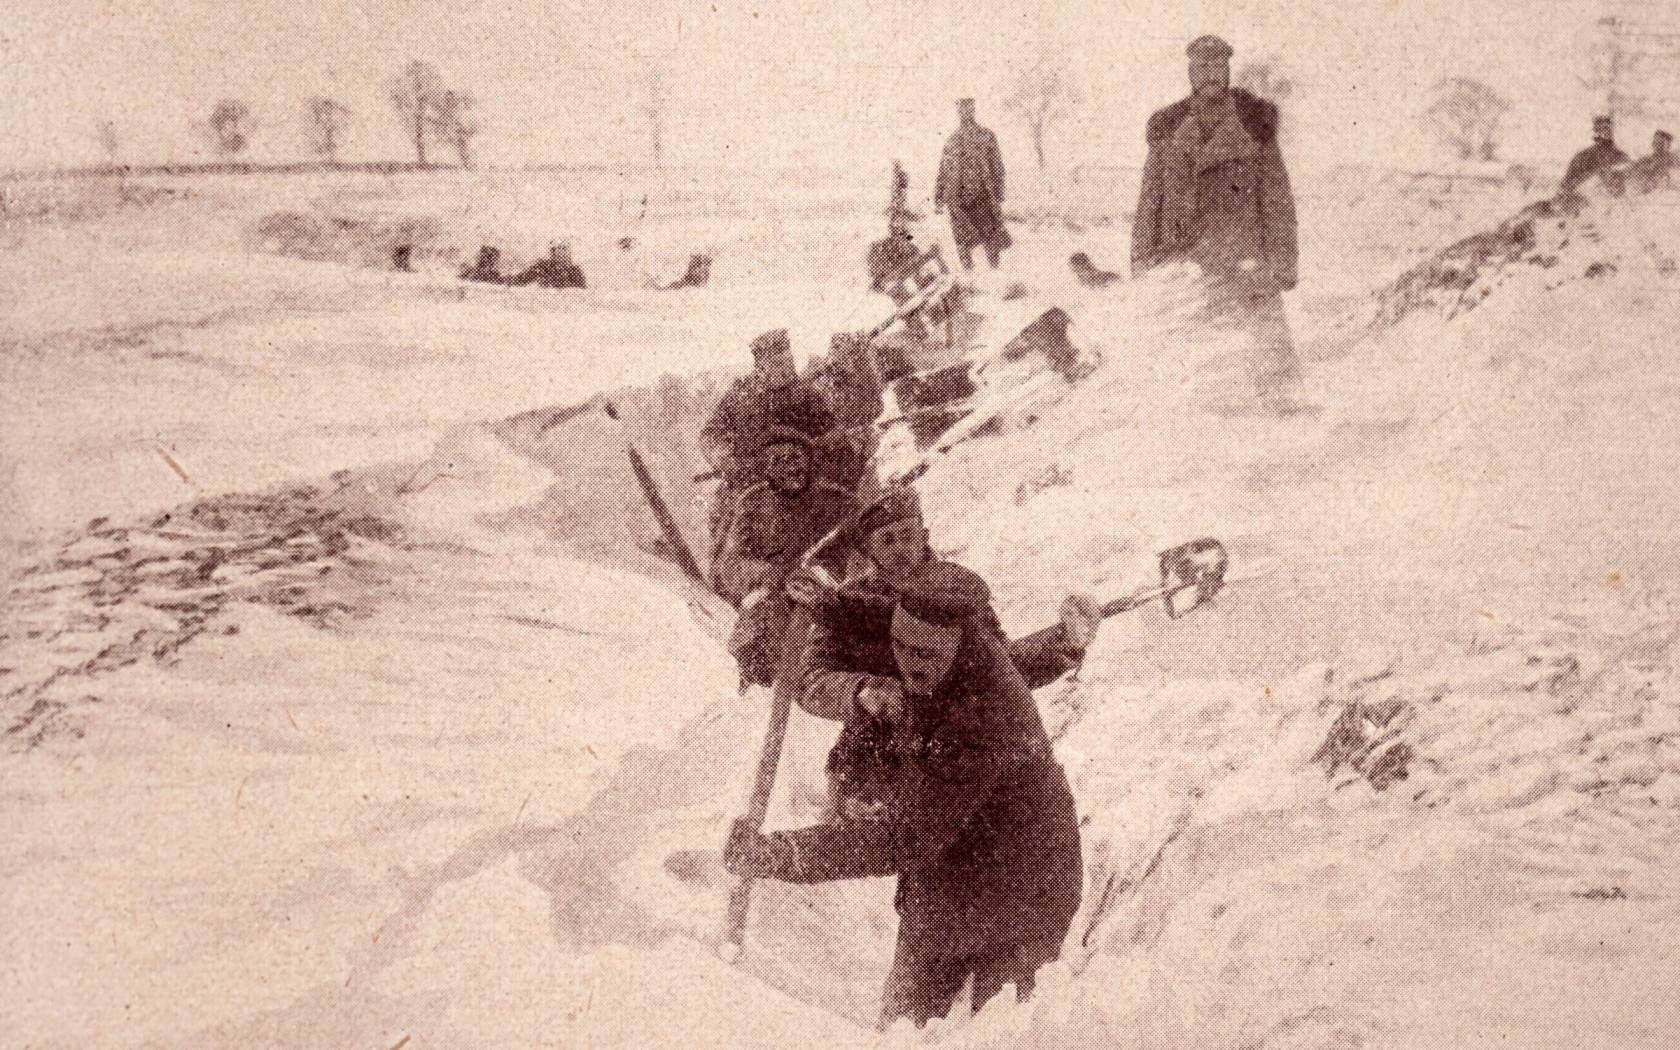 Trench warfare in Russia during the First World War